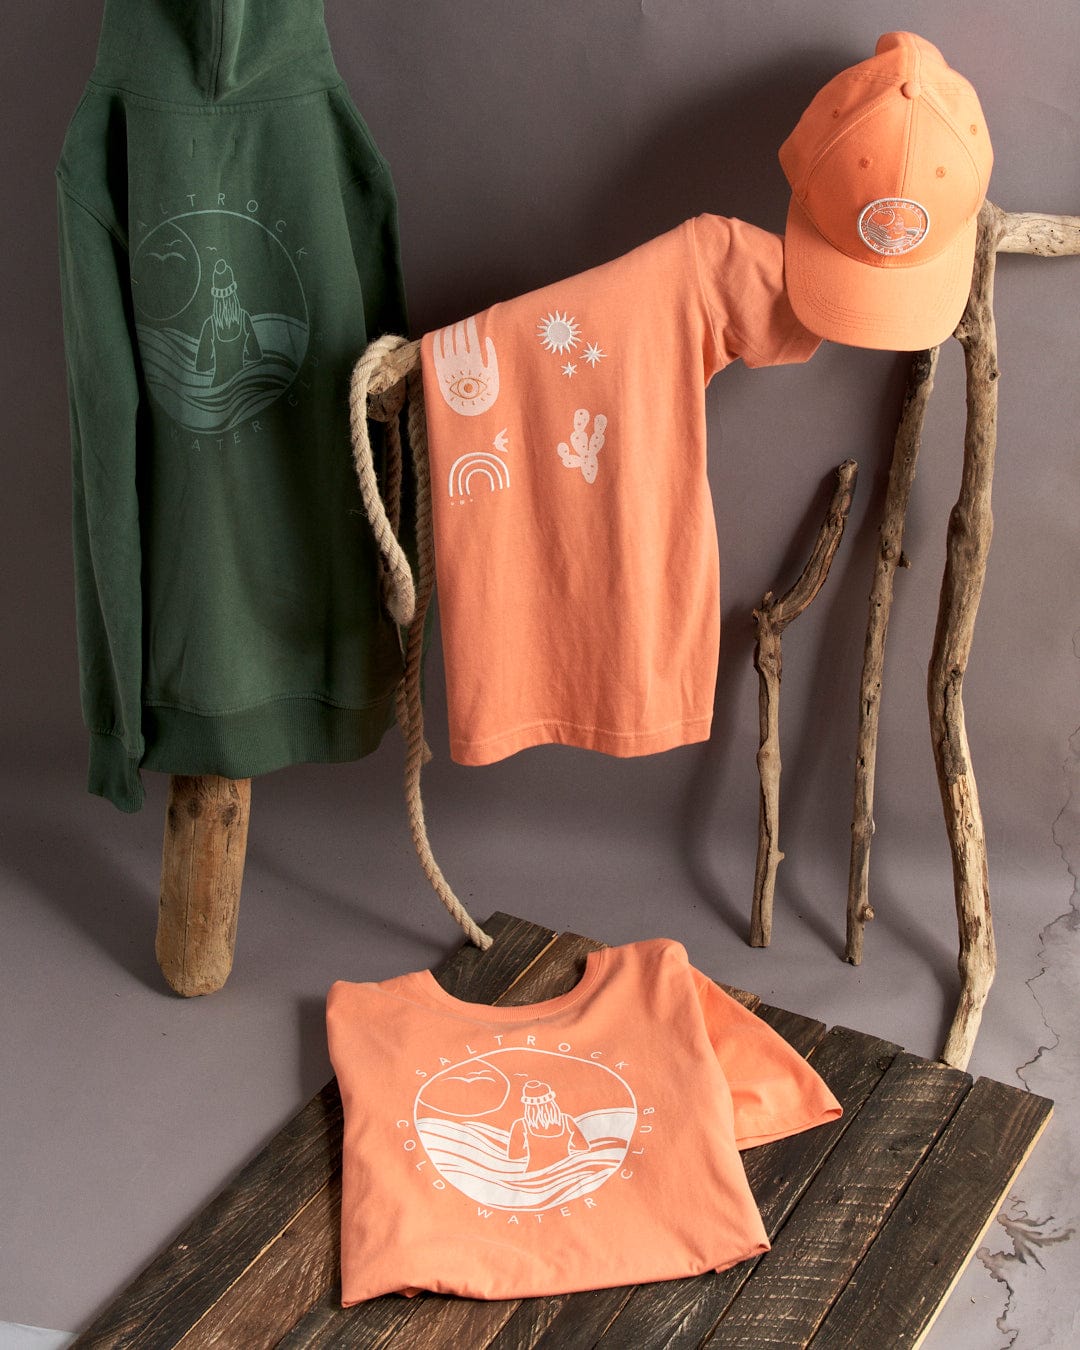 A collection of adventure-themed clothing and accessories displayed on wooden branches, featuring a Saltrock Coldwater Club green cotton hoodie, an orange cotton t-shirt, and a matching cap.